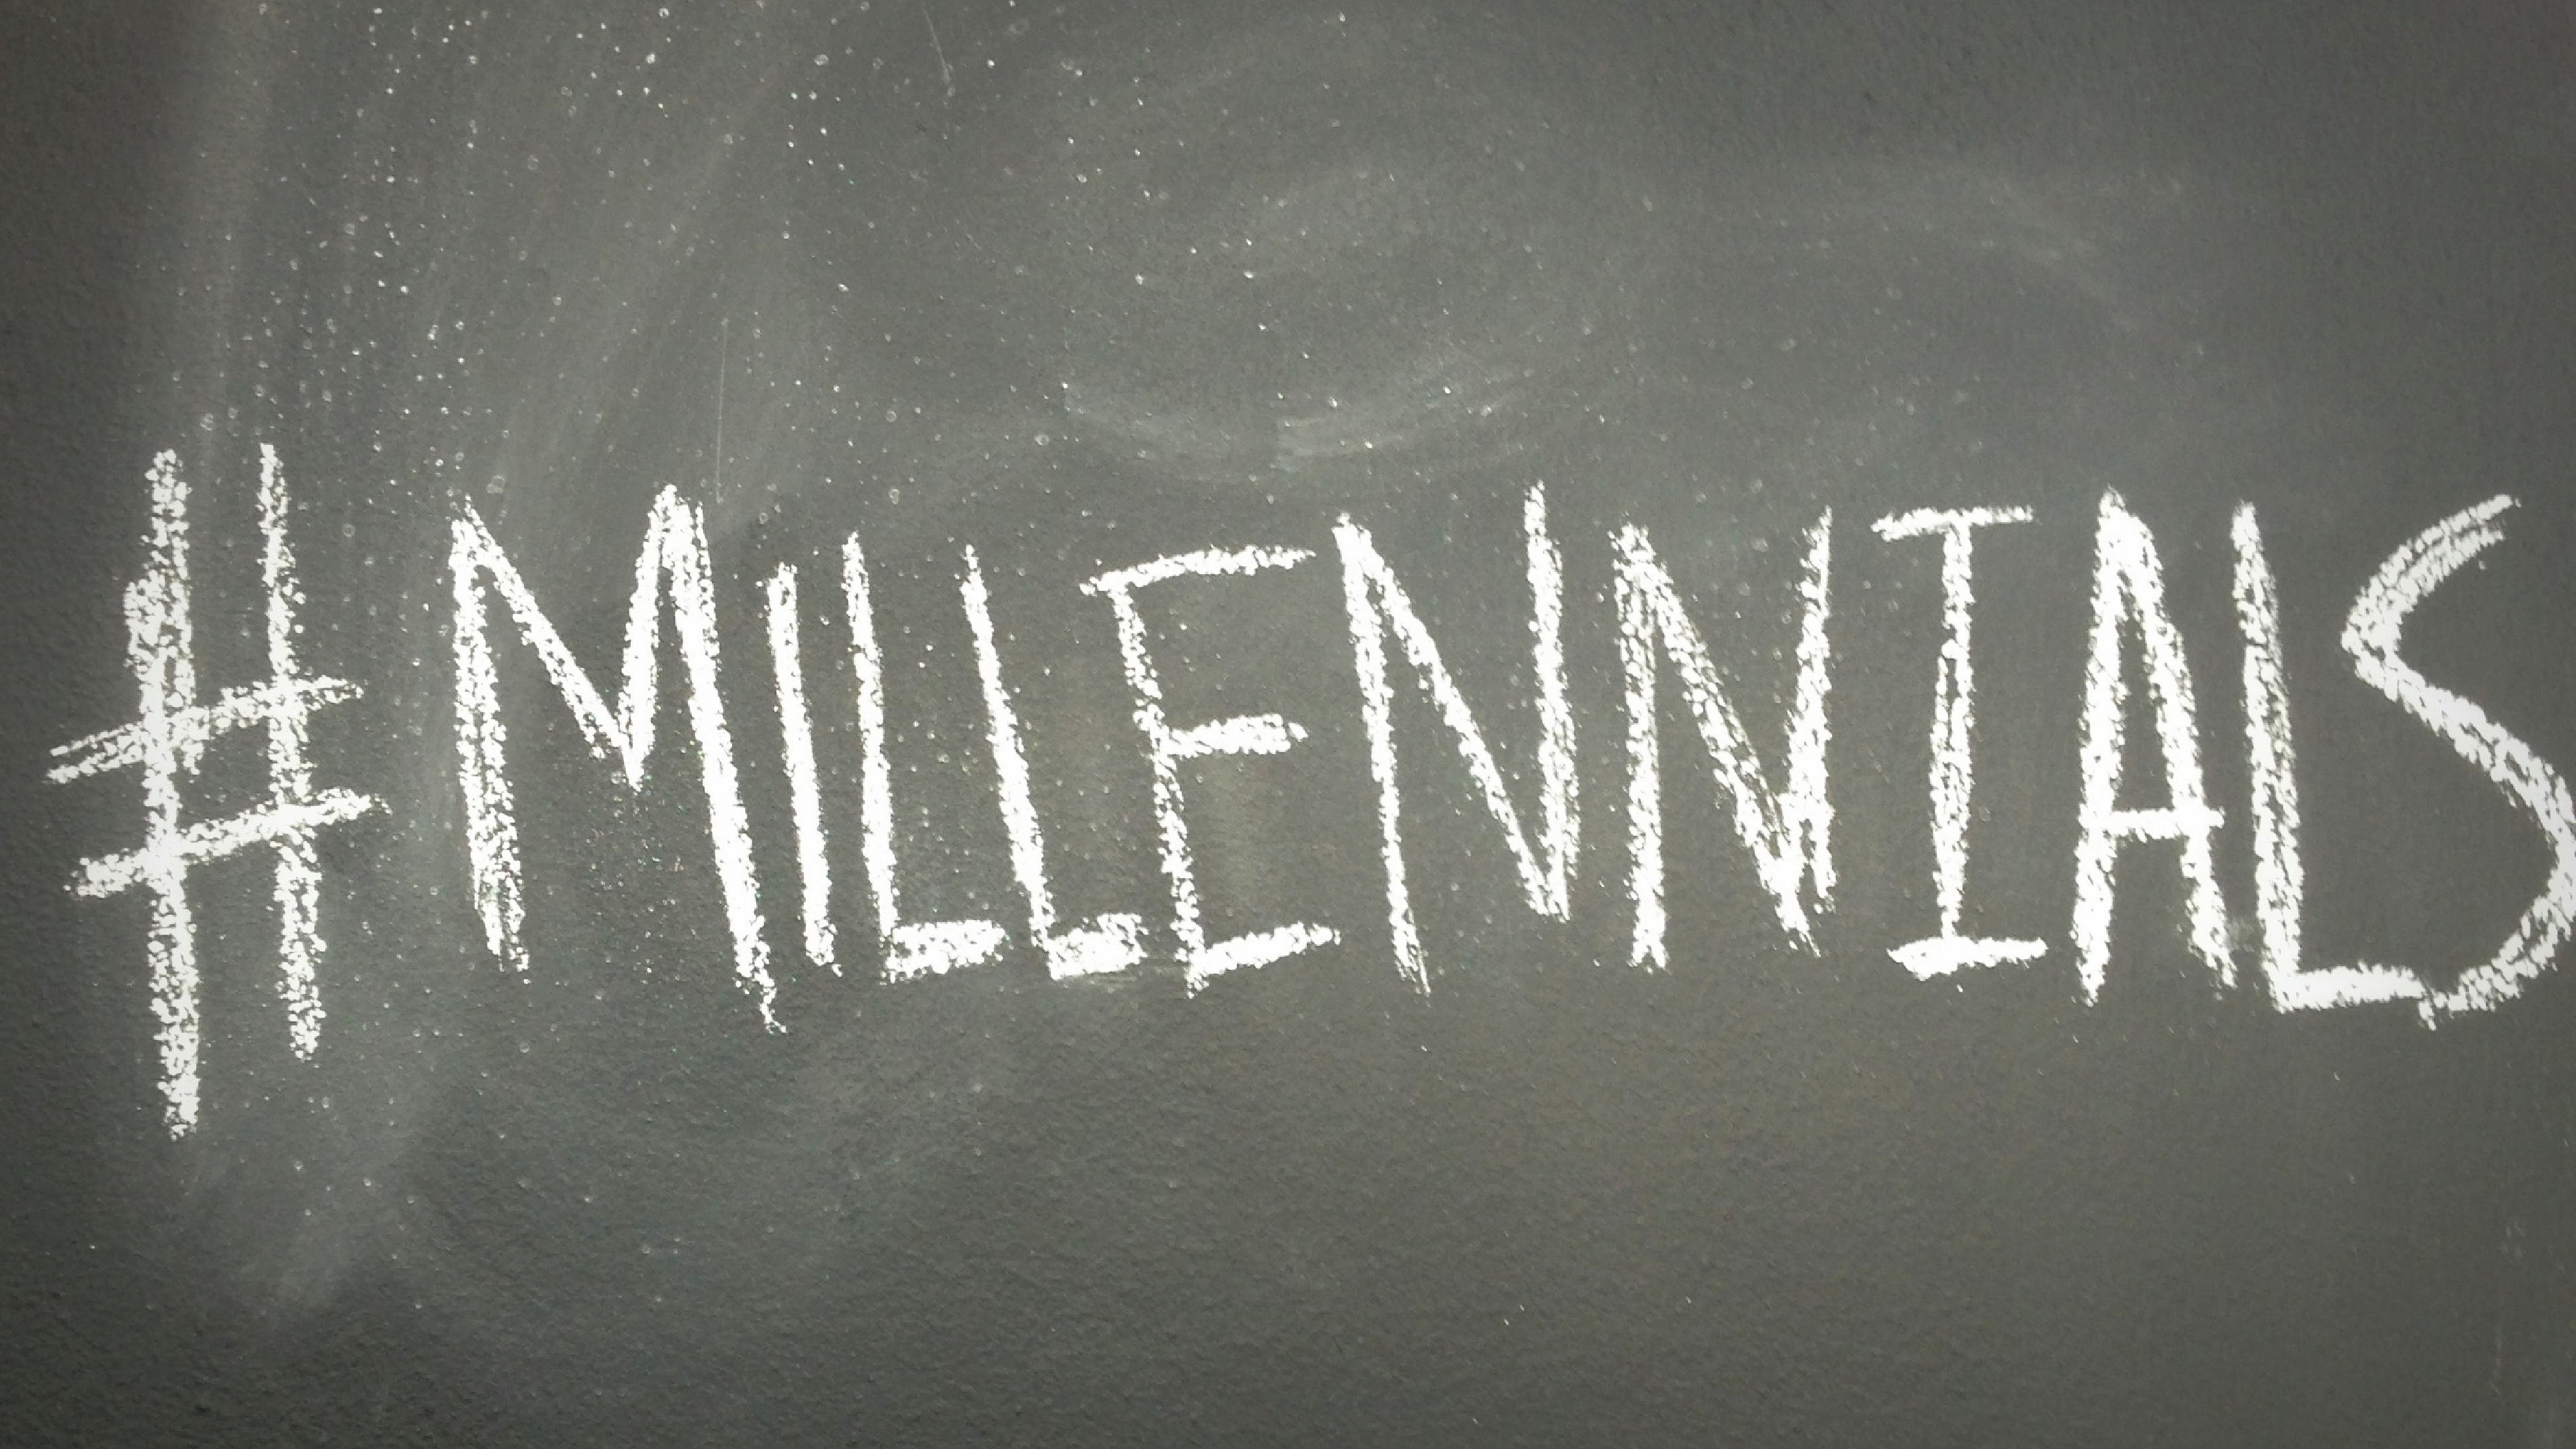 Coming from a Millennial: We Want a Mentor and #Values